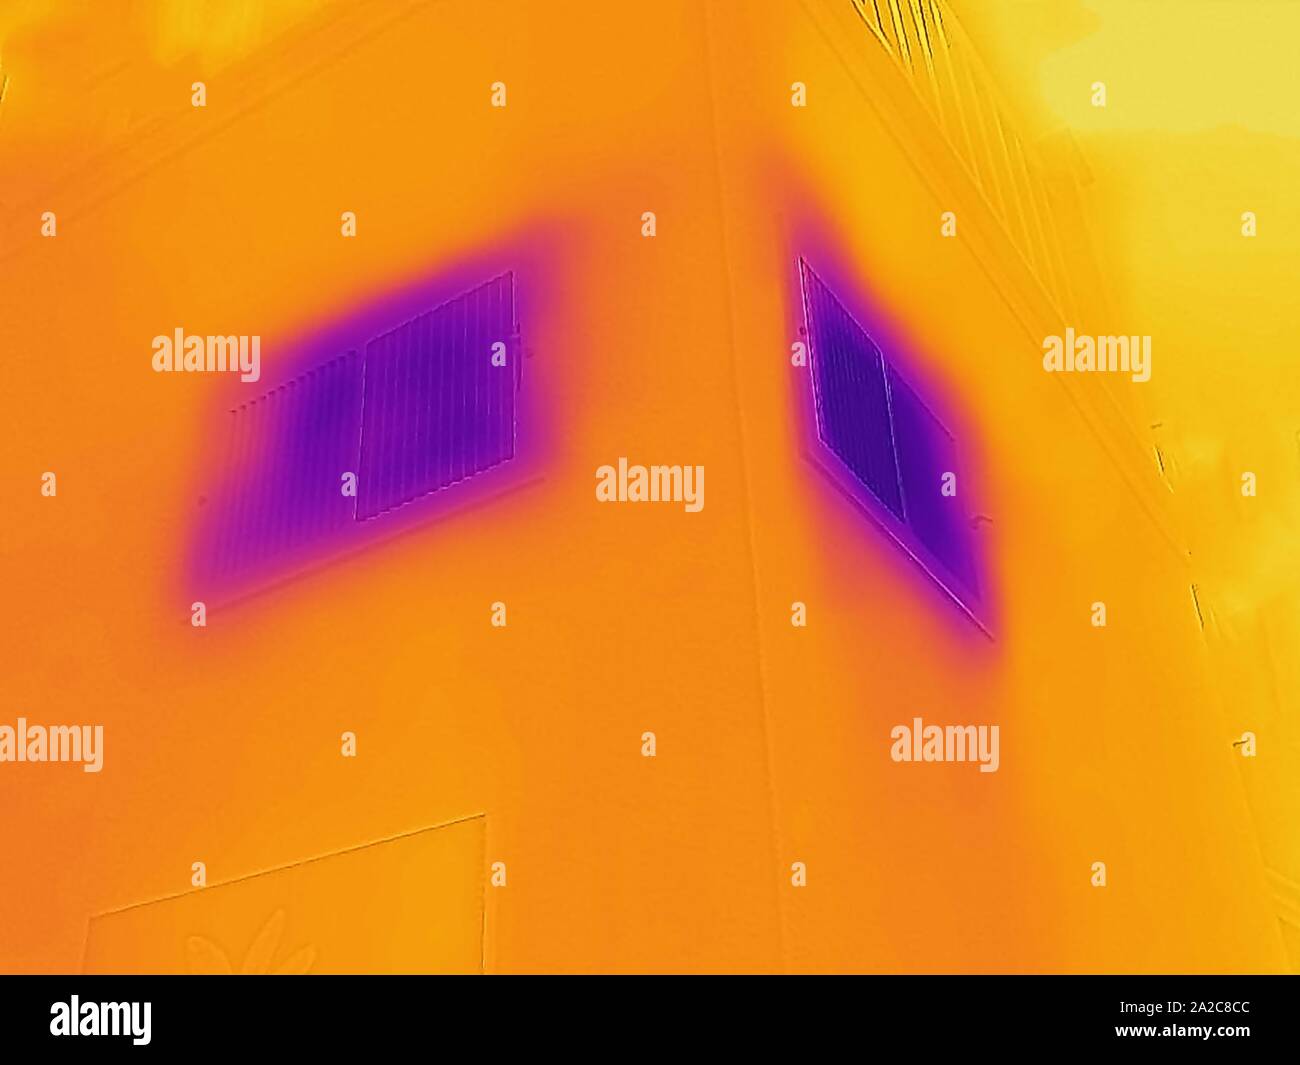 Thermal camera thermographic image, with light areas corresponding to higher temperatures, showing cold air produced by domestic HVAC air conditioning unit, at two air conditioning vents or registers in a domestic room, San Ramon, California, September 2, 2019. () Stock Photo